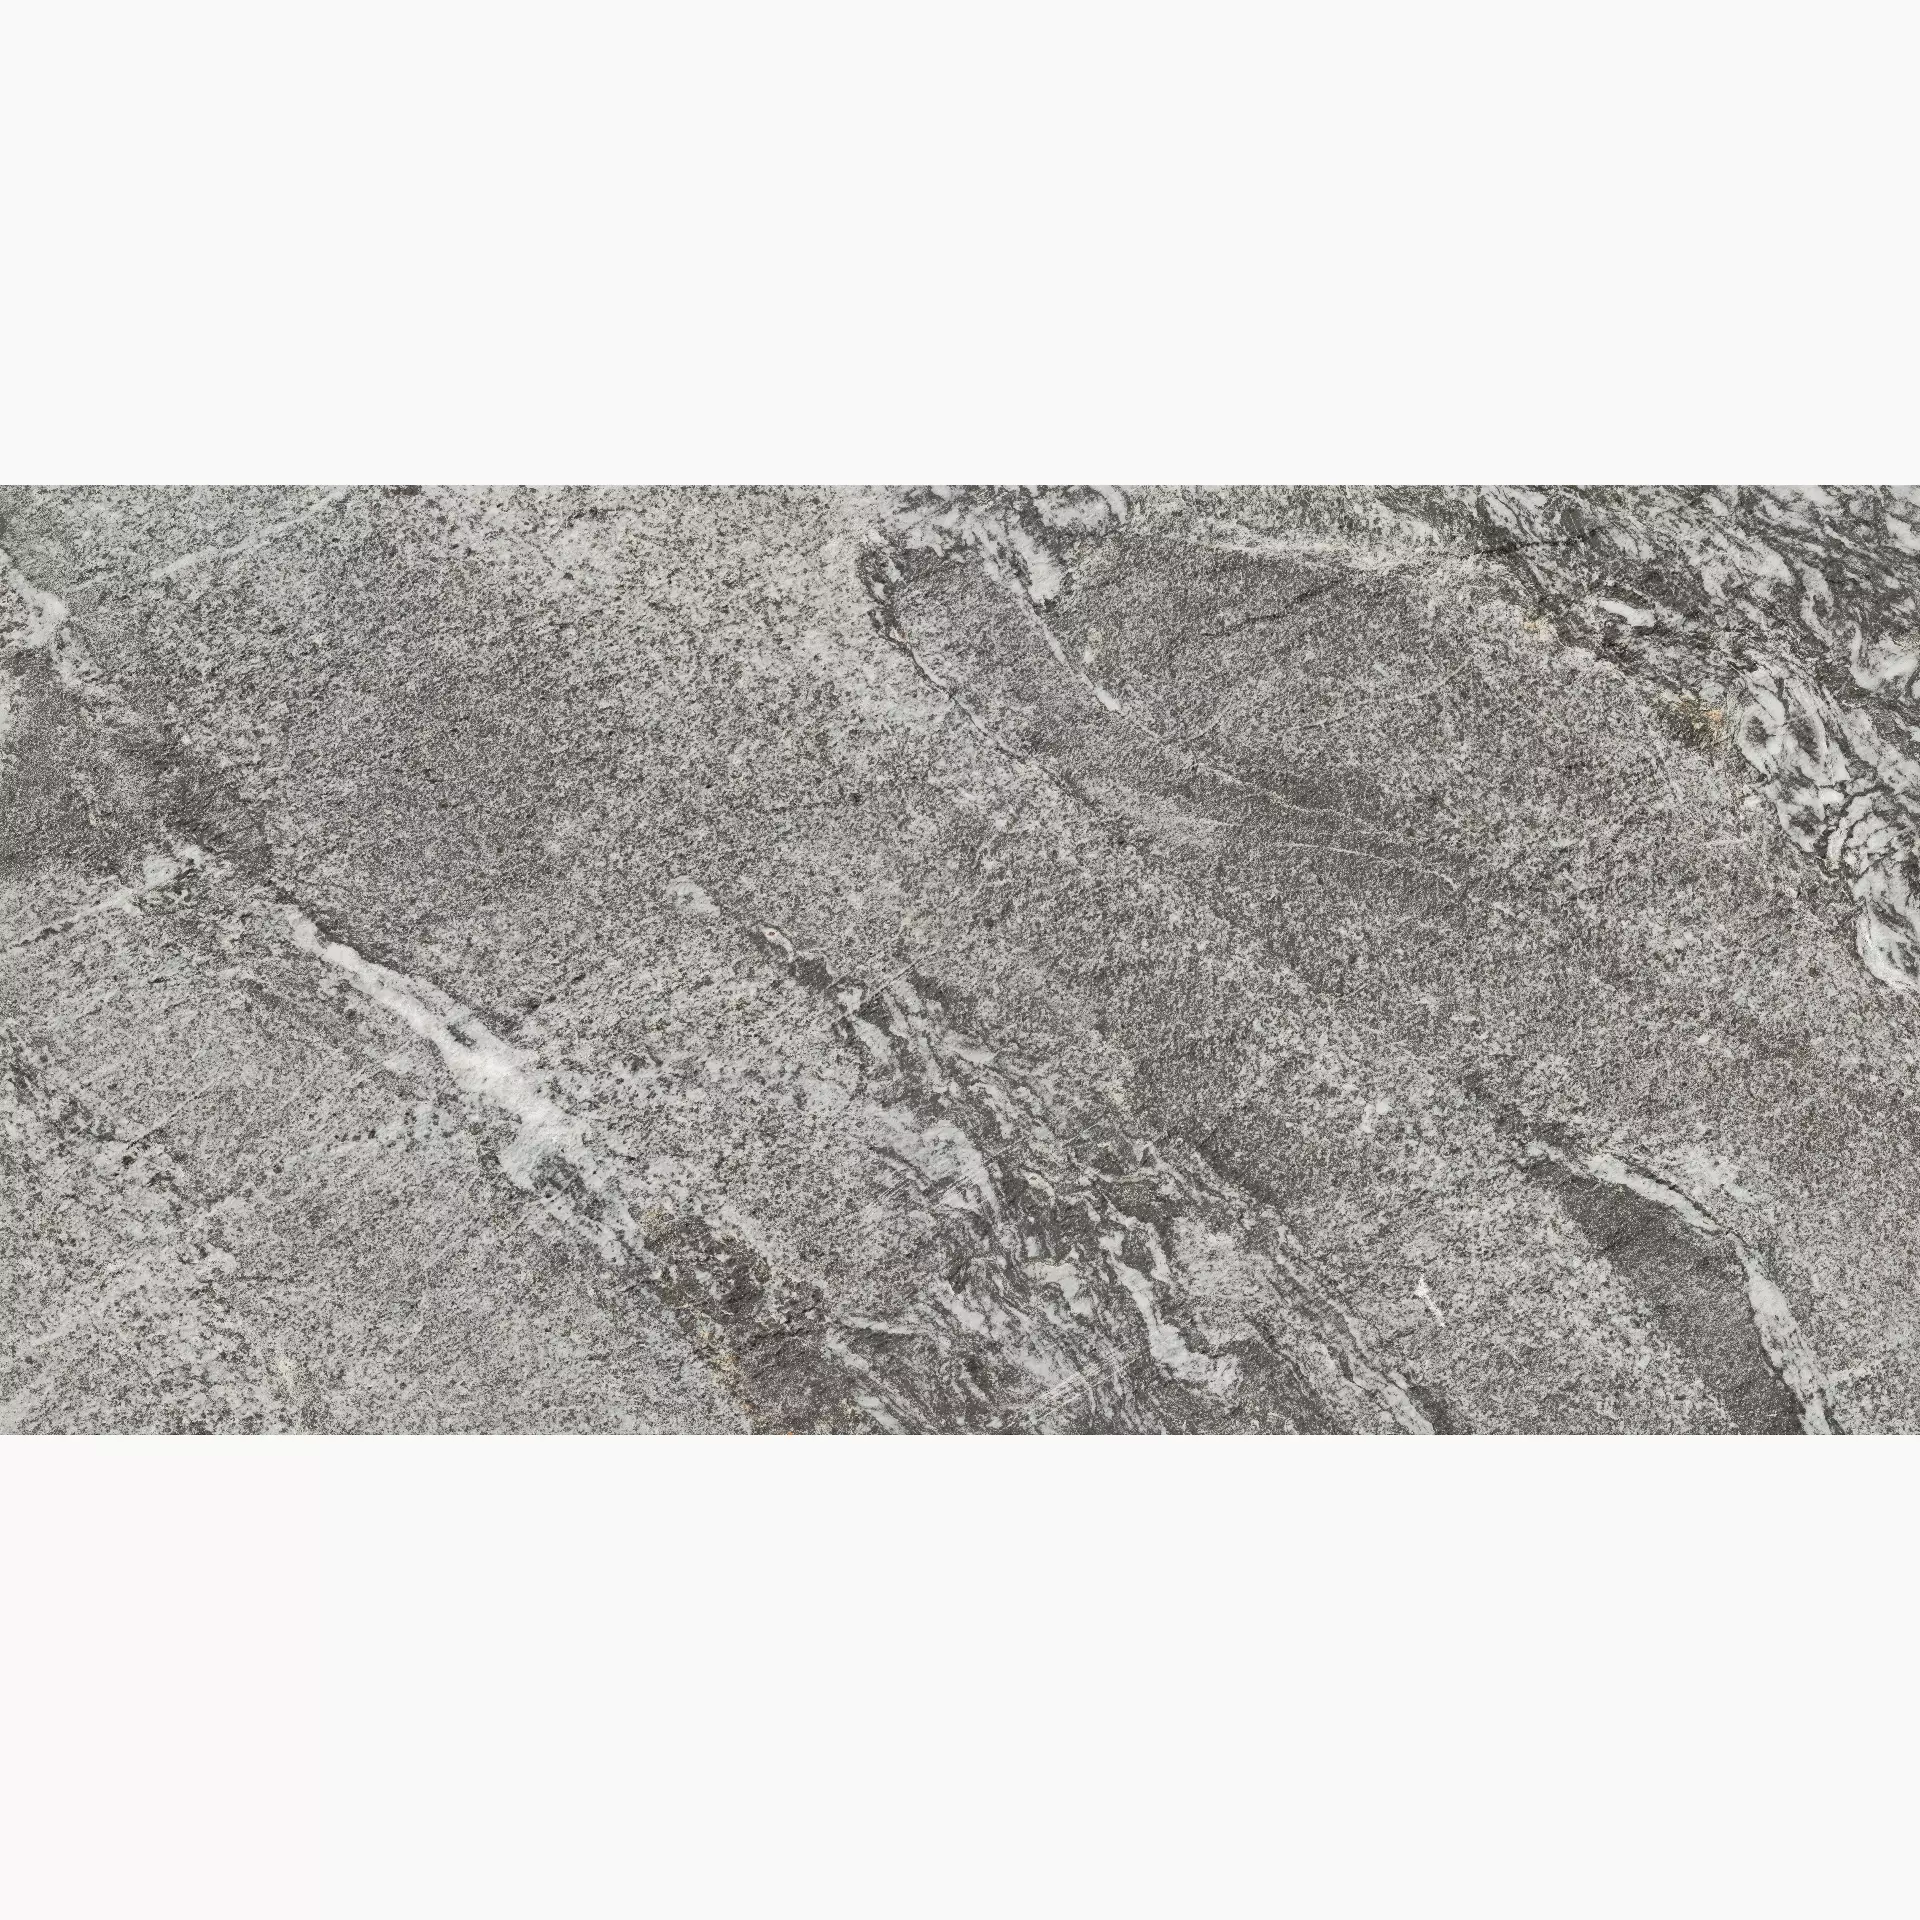 Panaria The Place Suburb Grey Antibacterial - Strutturato PGKP920 20x40,5cm 12mm